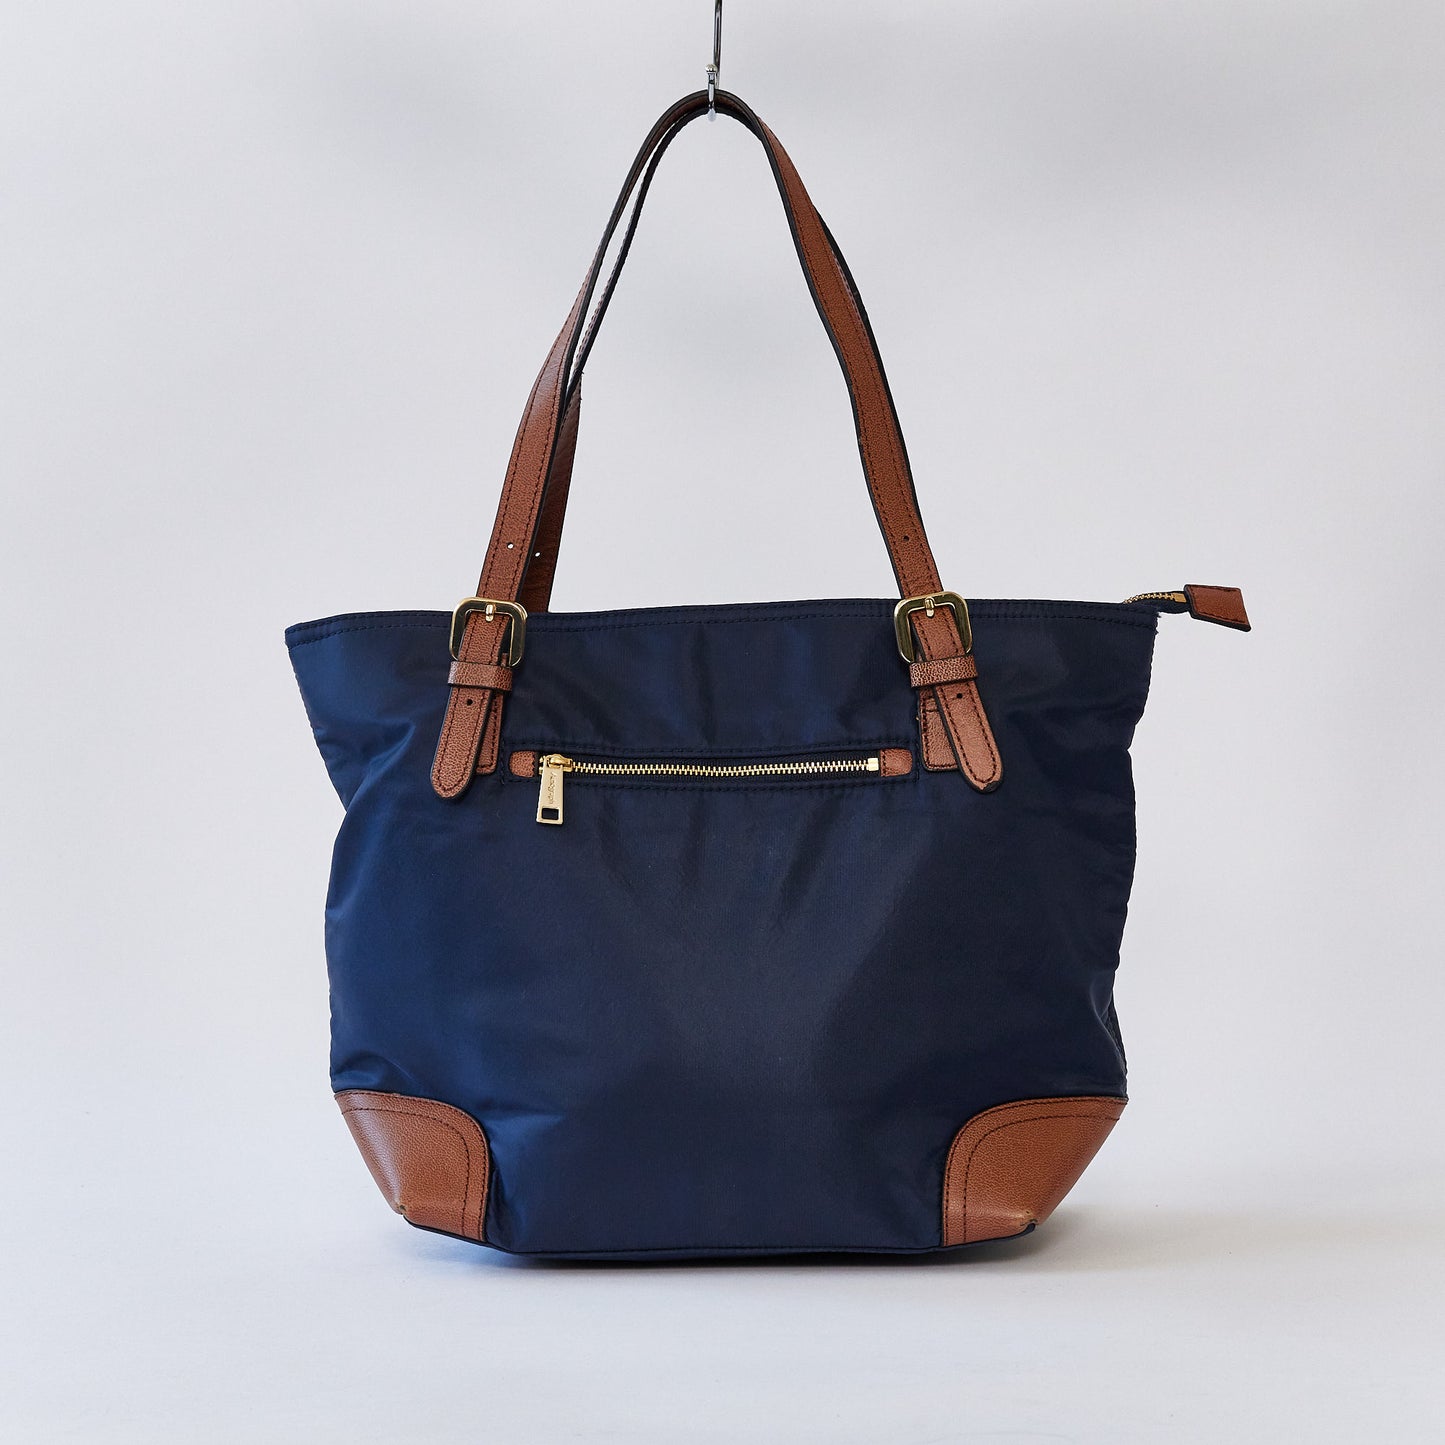 Navy Tote bag with brown handle